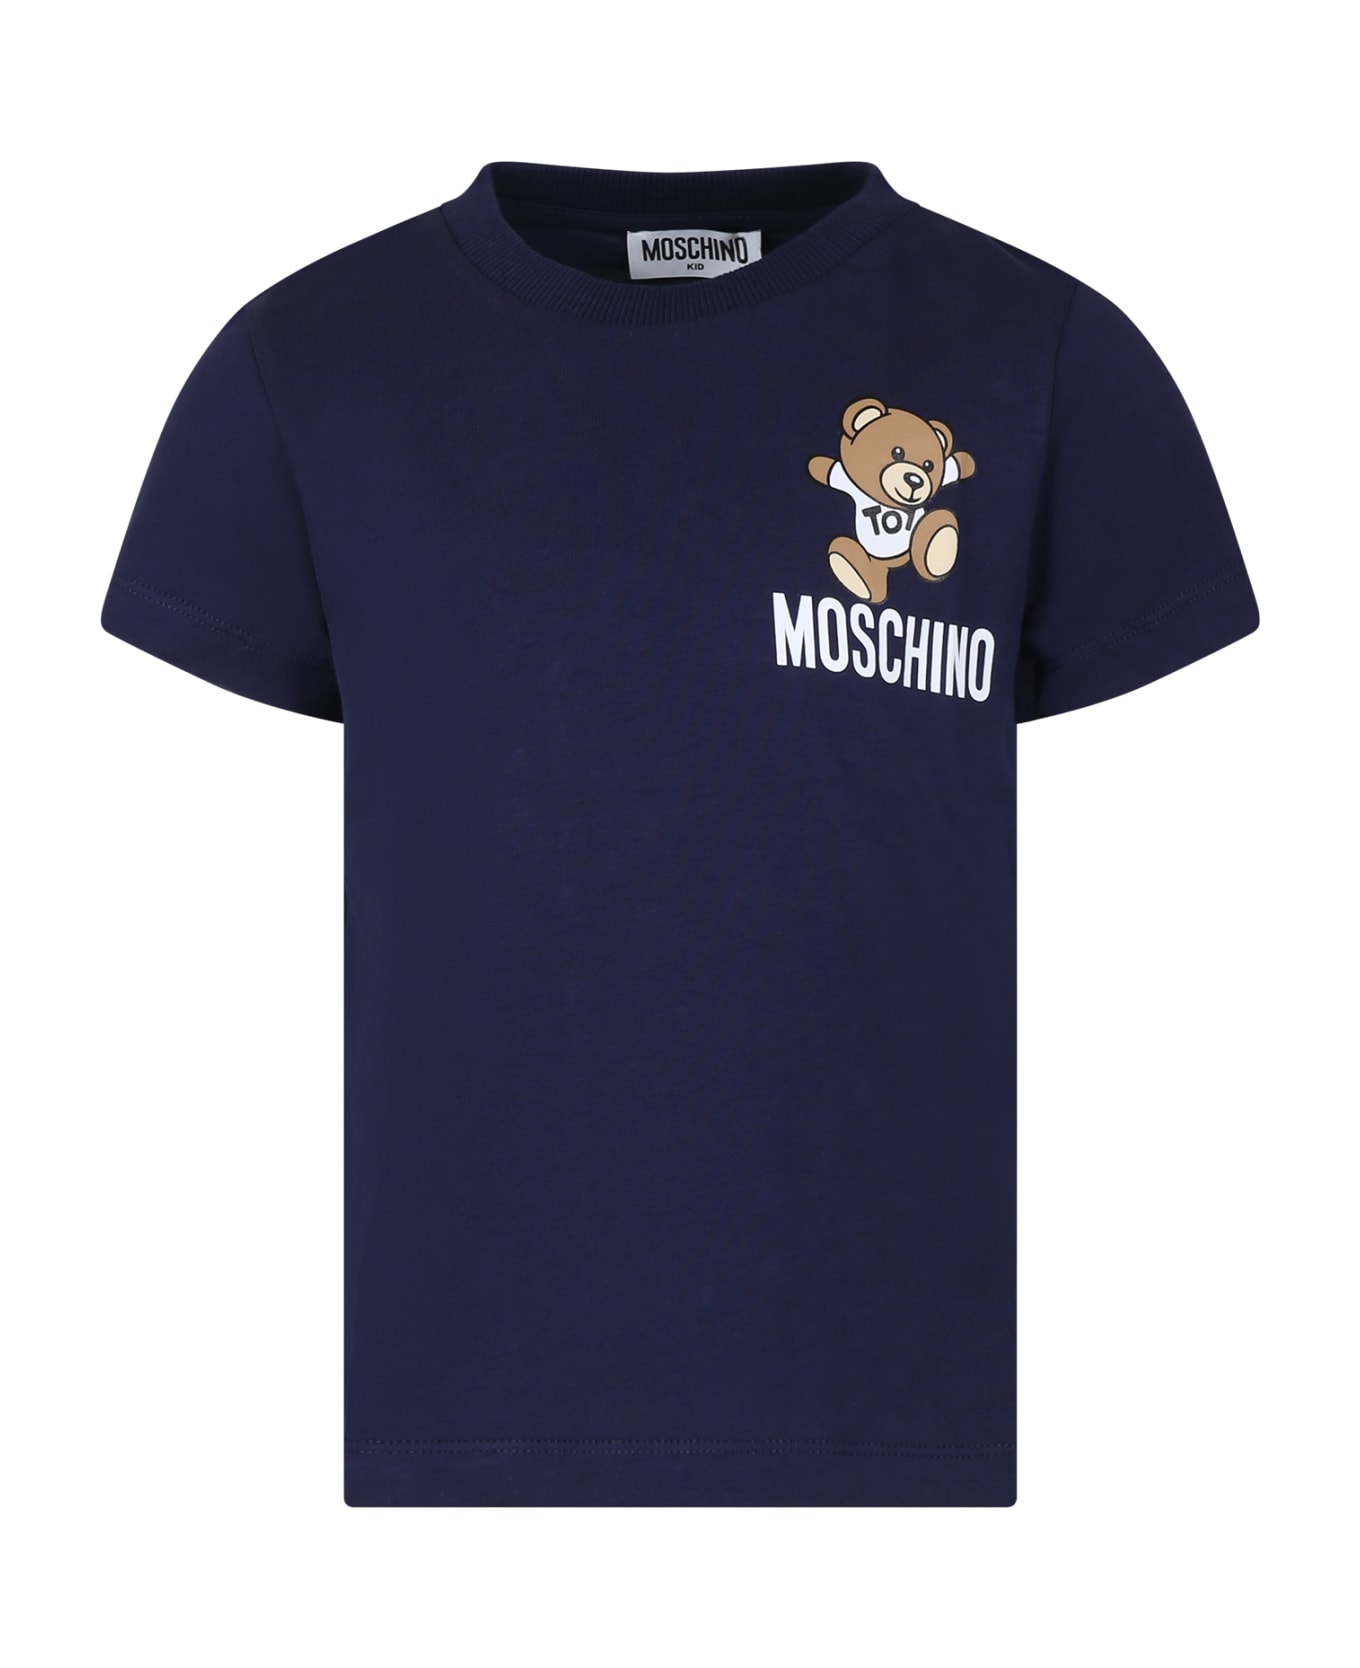 Moschino Blue T-shirt For Kids With Teddy Bear And Logo - Blue